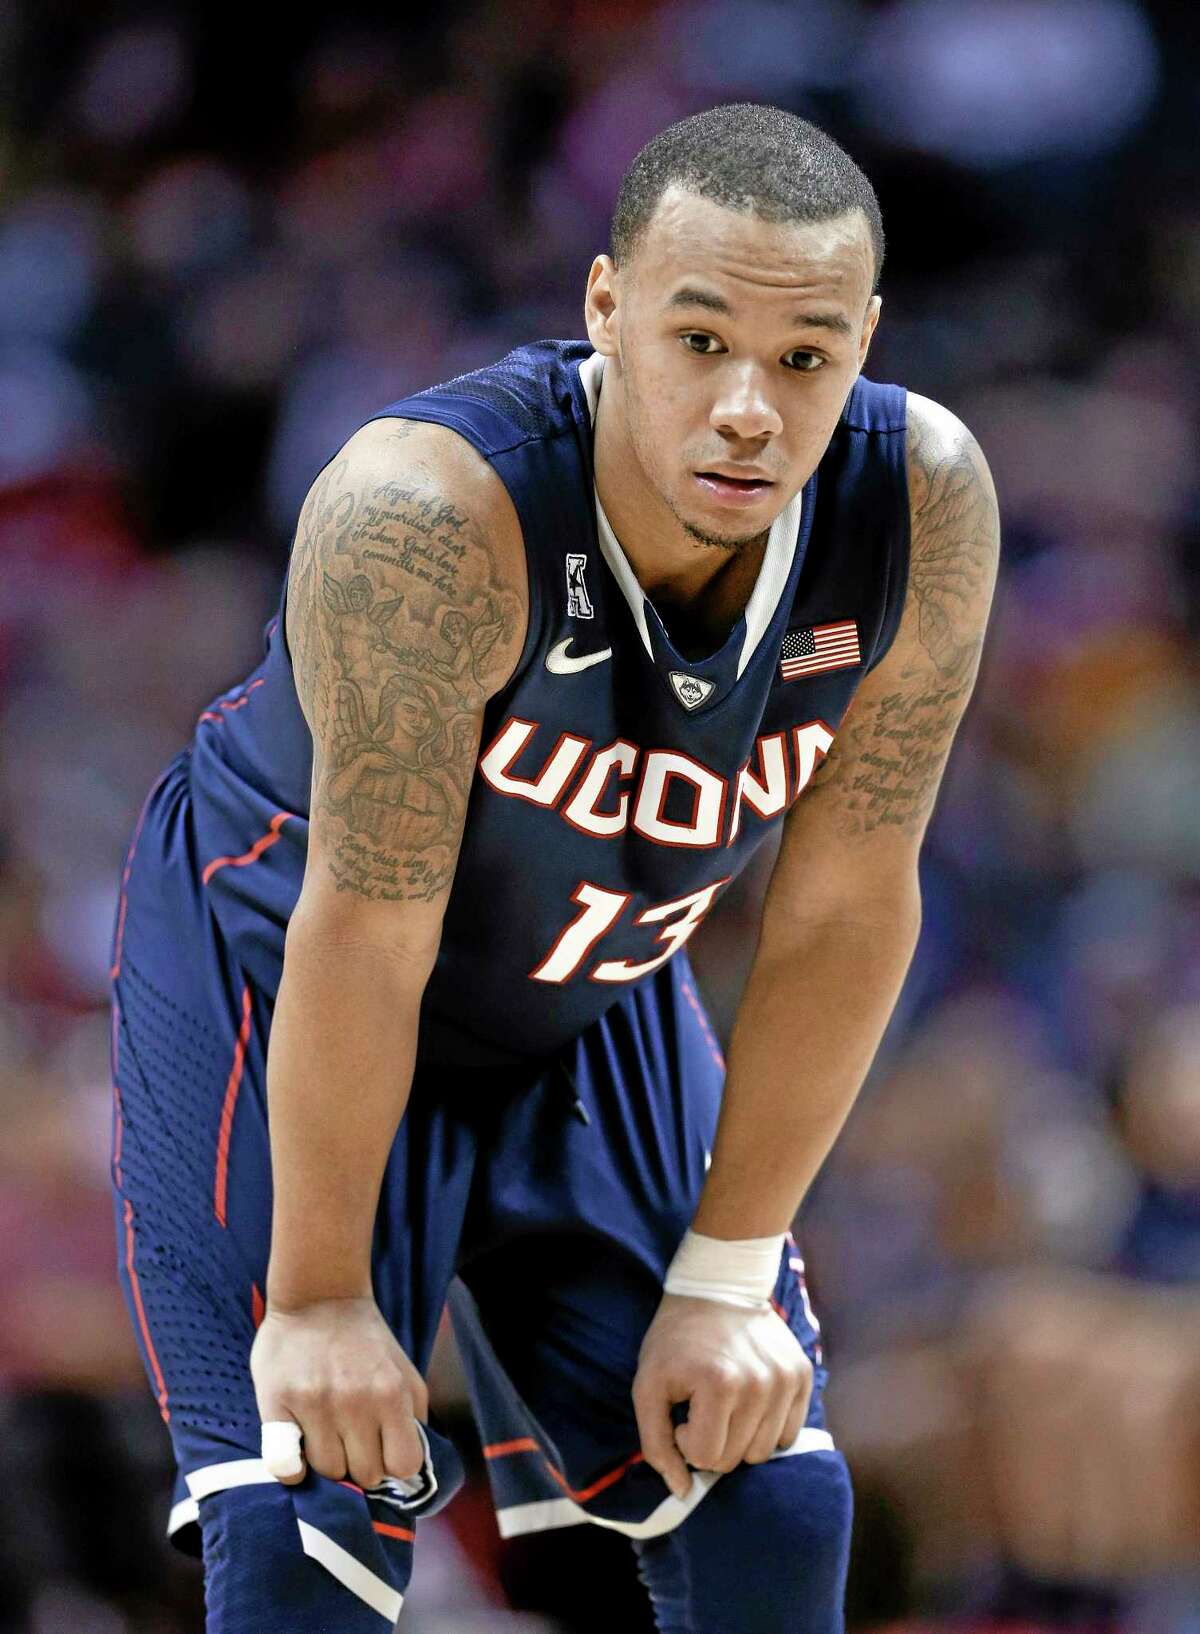 UConn and guard Shabazz Napier return to the NCAA tournament on Thursday, facing St. Joseph’s.